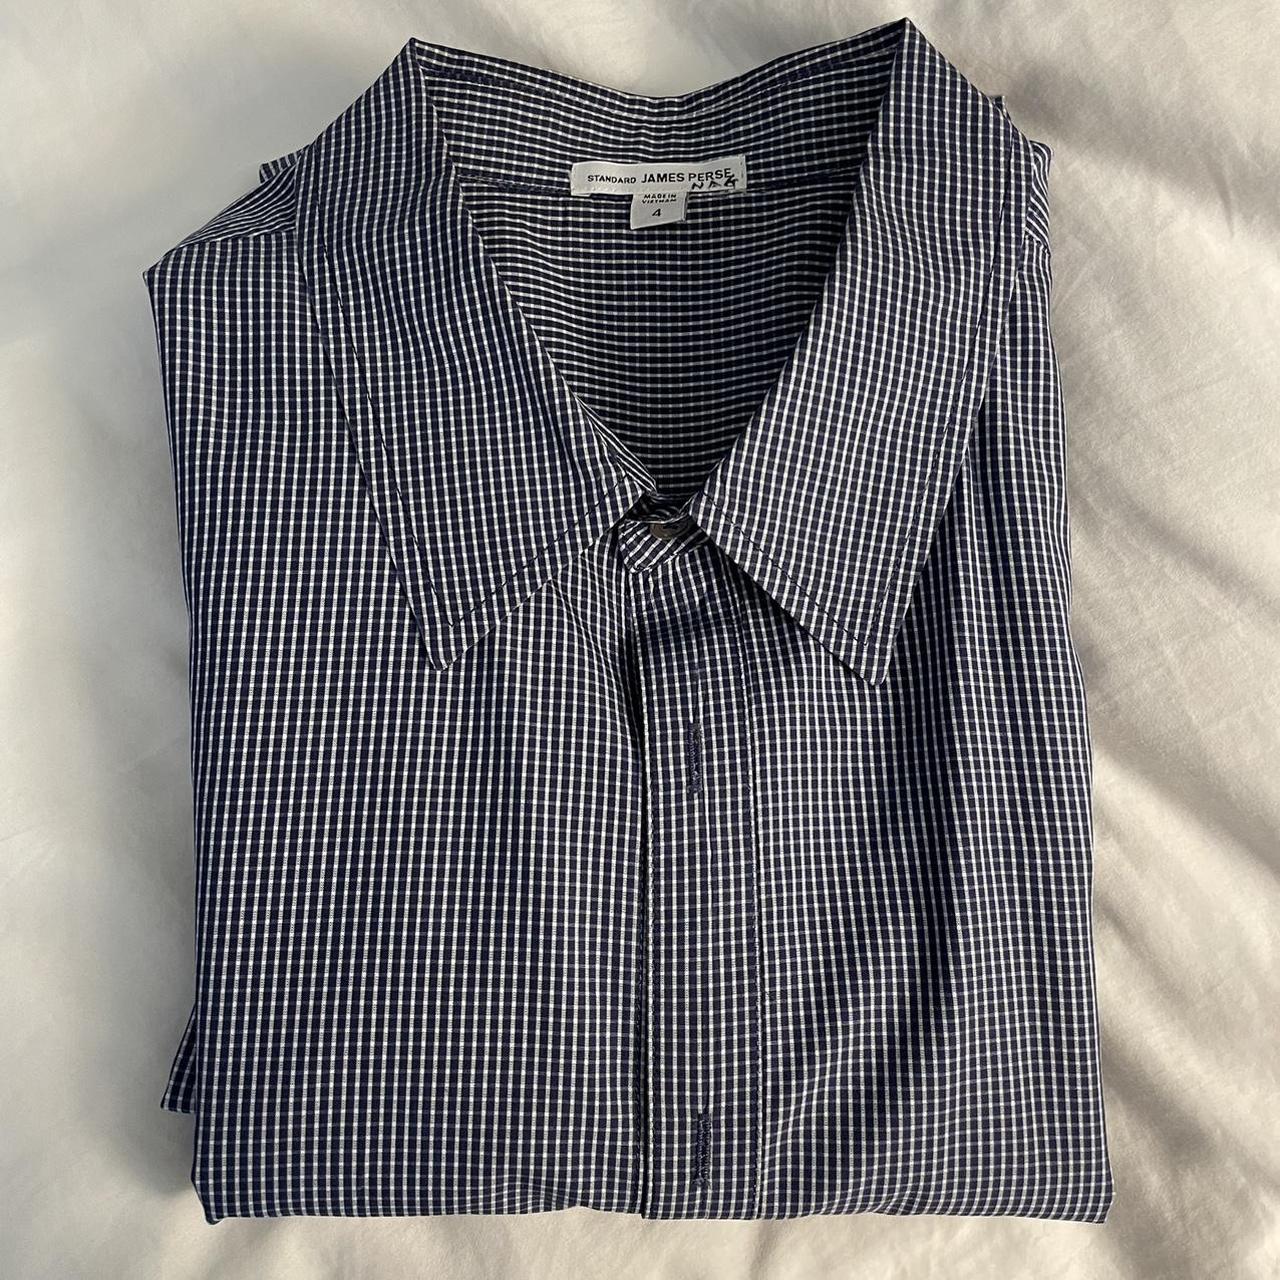 James Perse Men's White and Navy Shirt